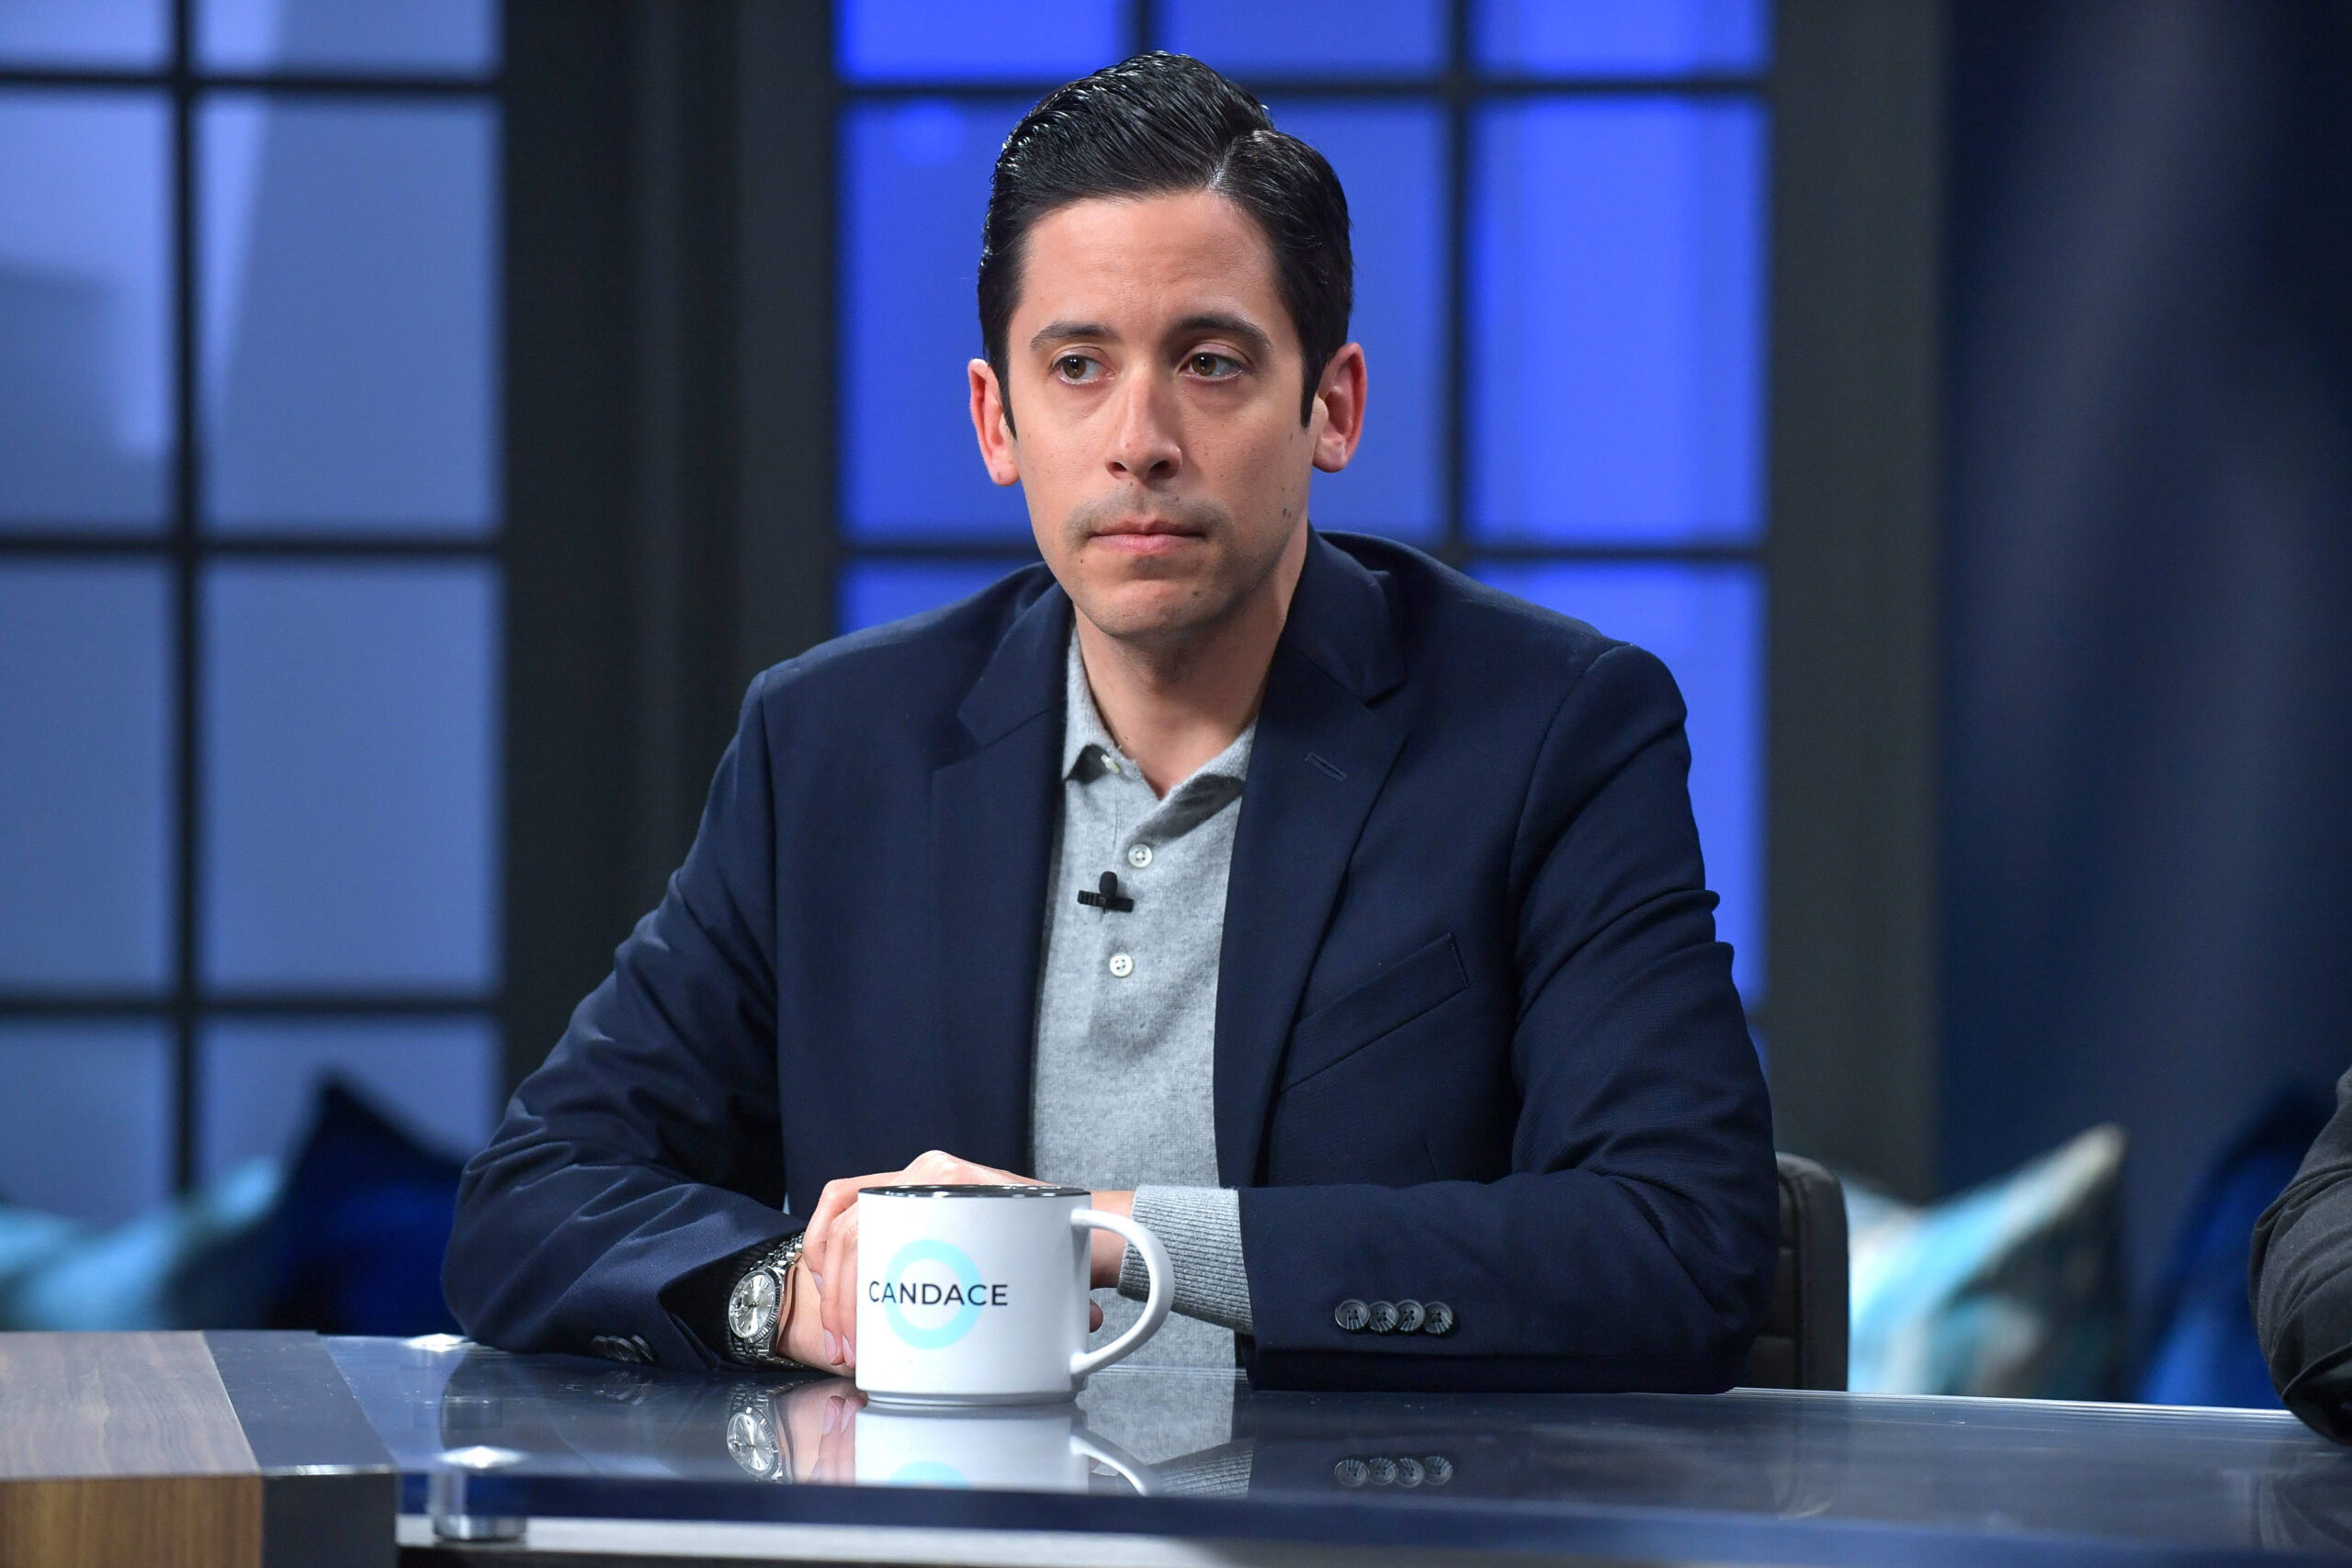 Michael Knowles Explains How The Left Hoaxes Its Way To Power